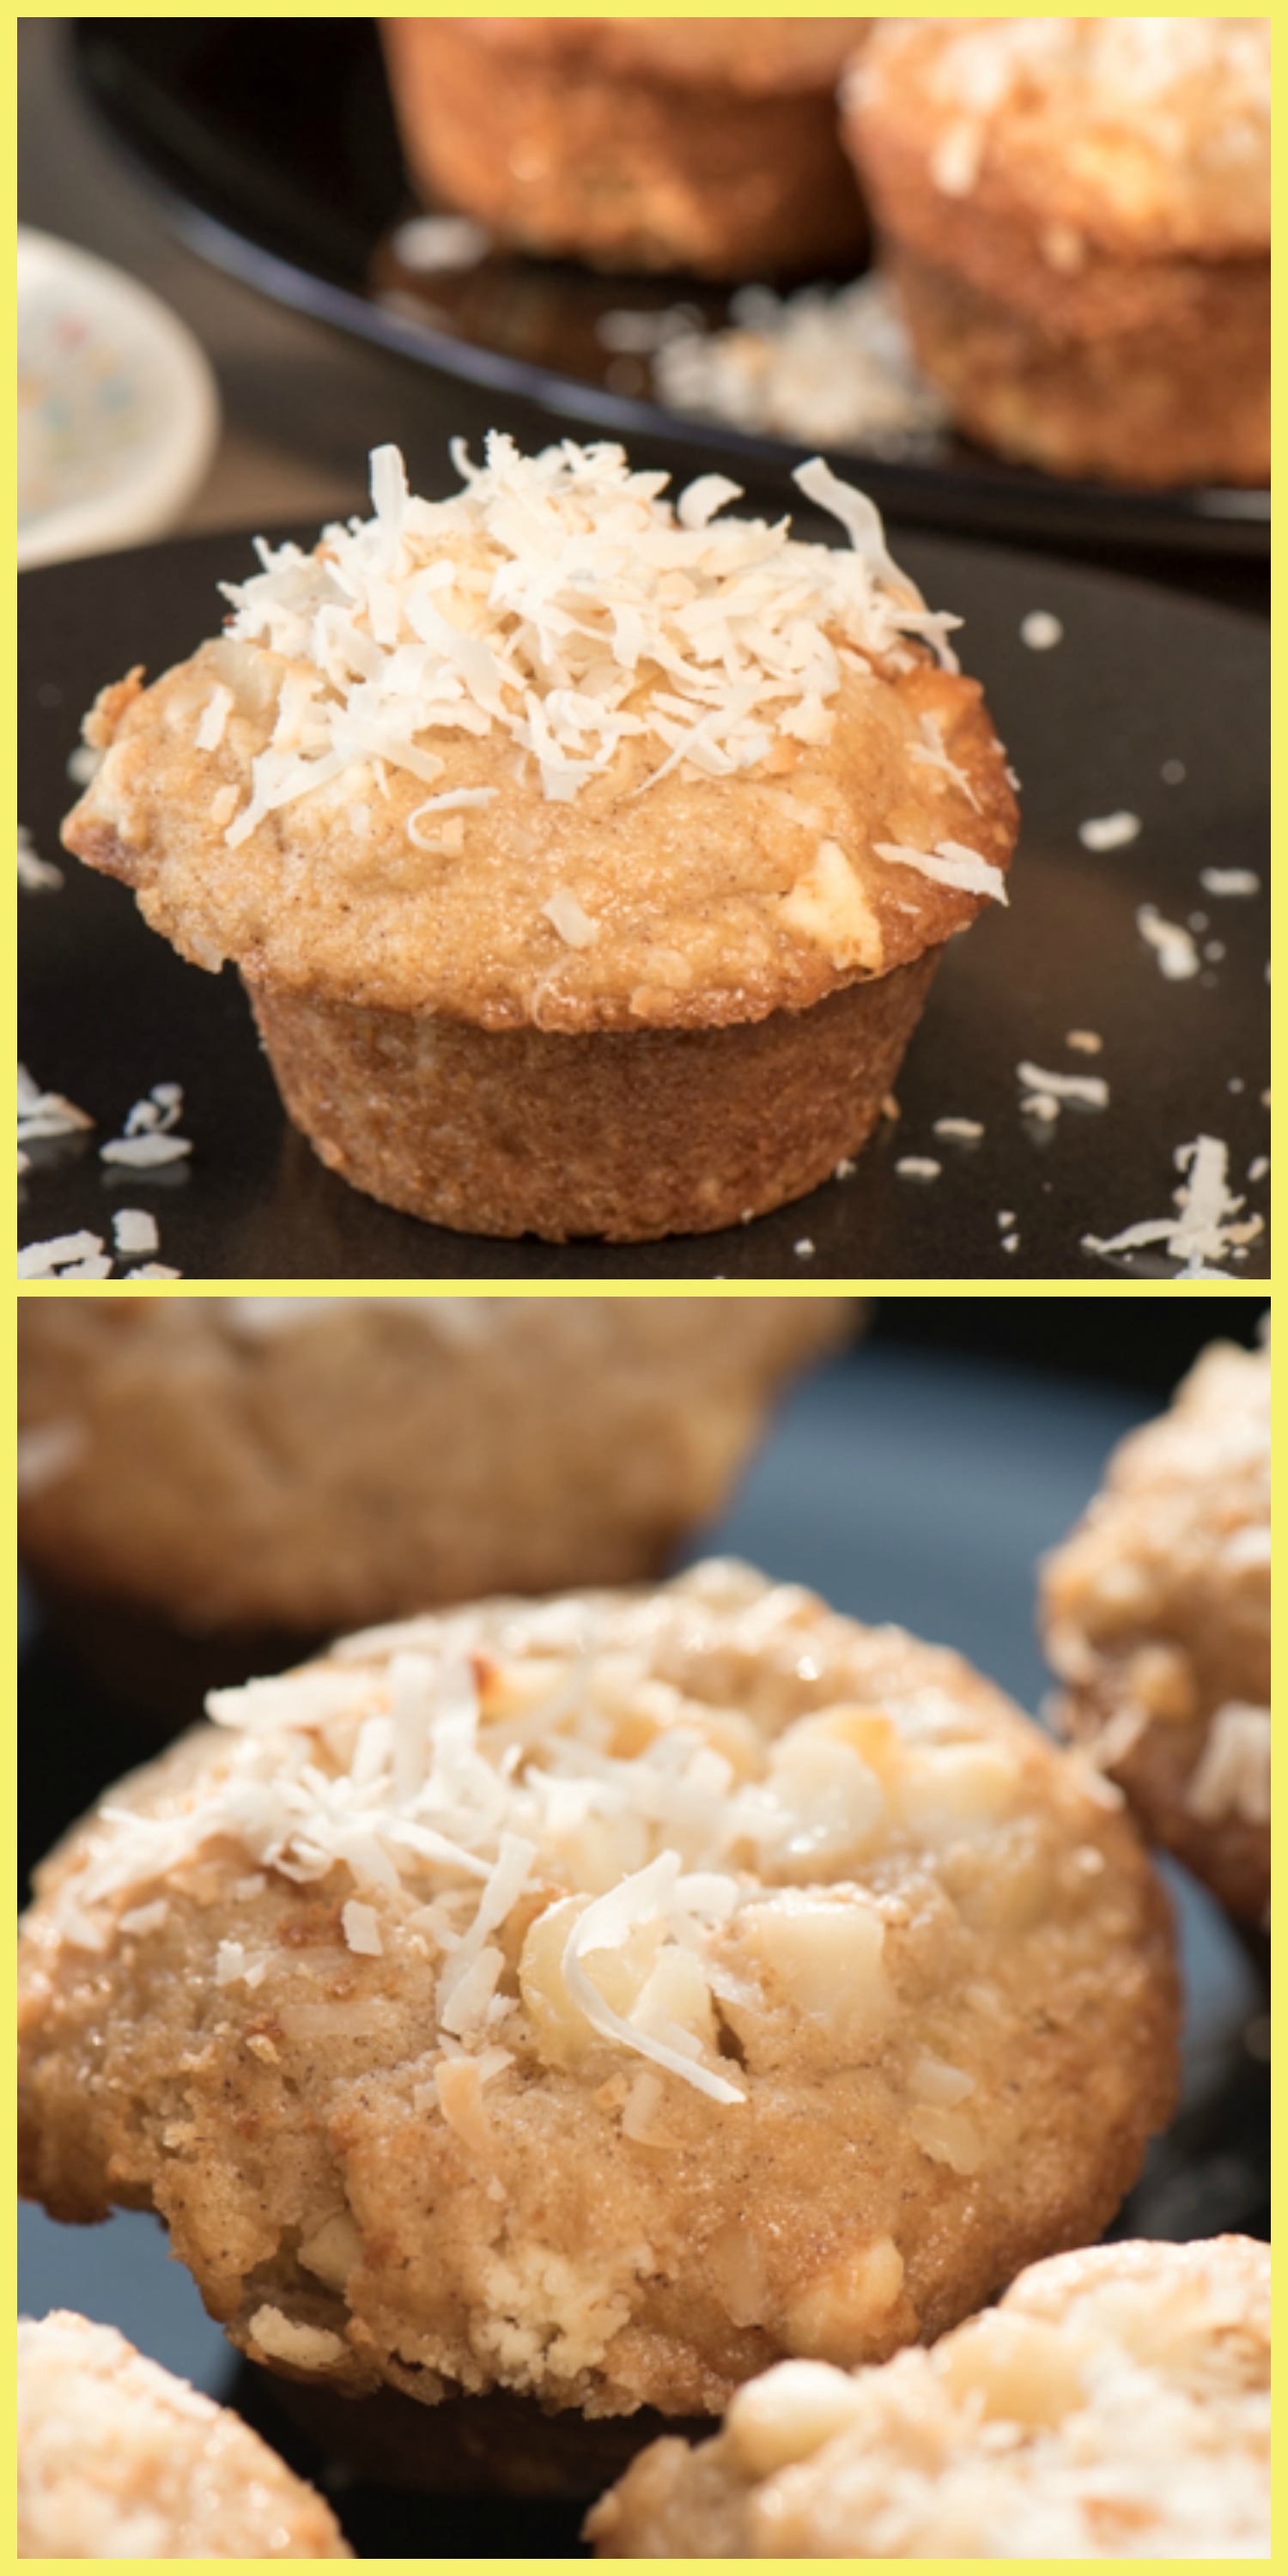 Coconut macadamia nut muffins are perfect anytime -- breakfast, snack or dessert! Not too sweet, easy to make and filling. Make extra to freeze! | The Recipe Wench